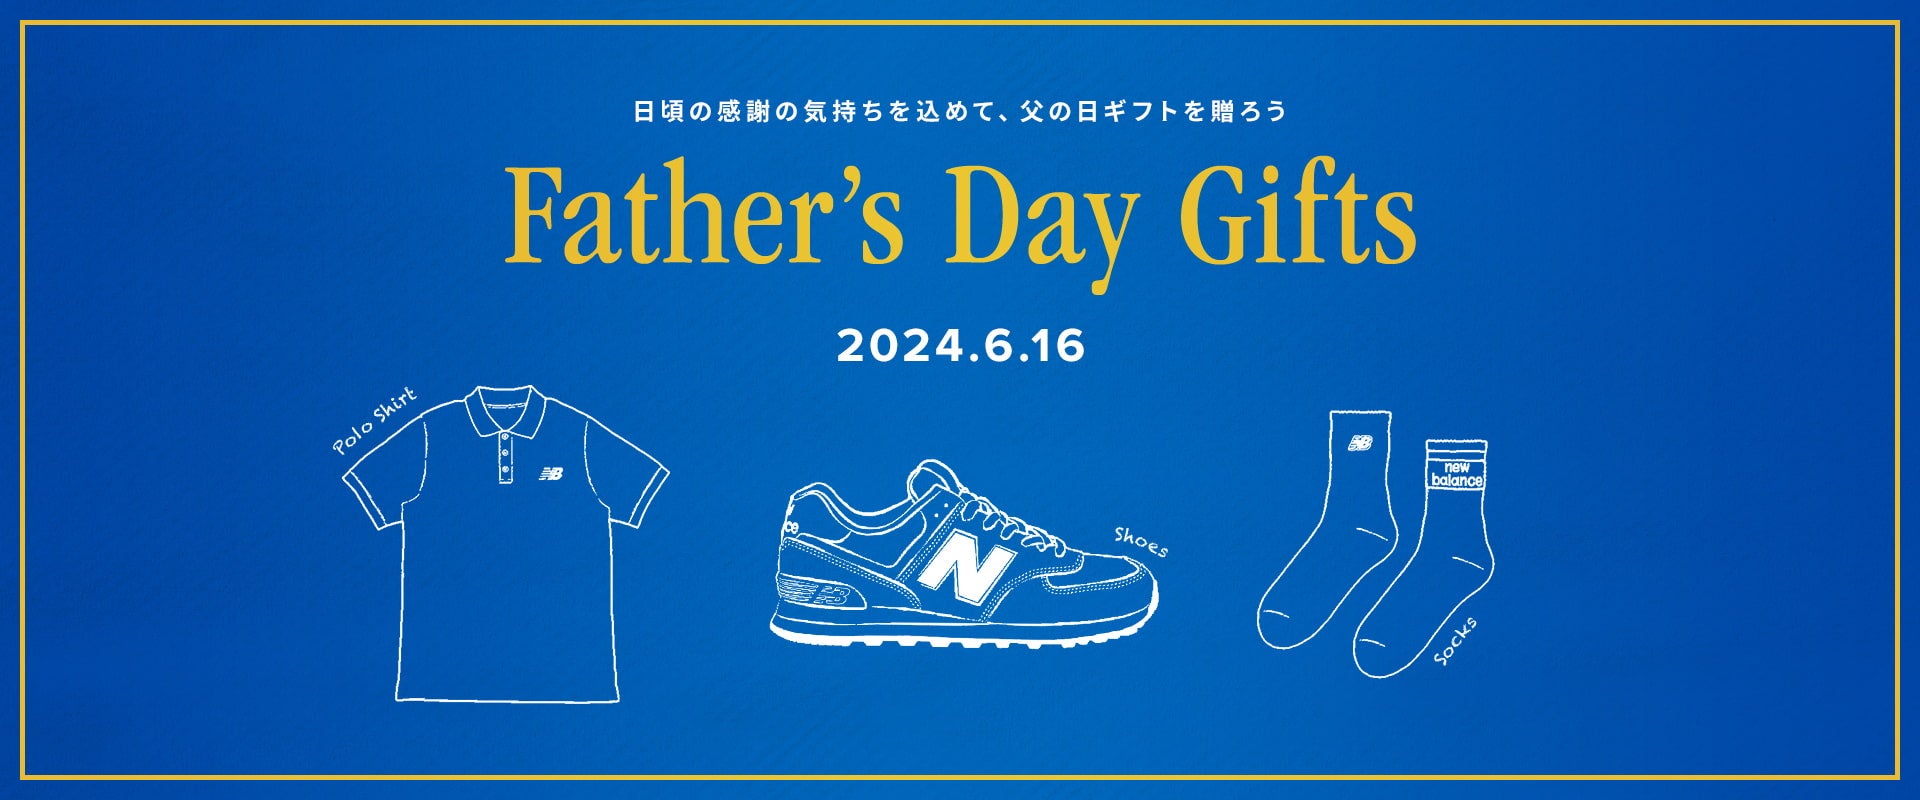 Give your father a Father's Day gift to show your appreciation. Father's Day June 16, 2024